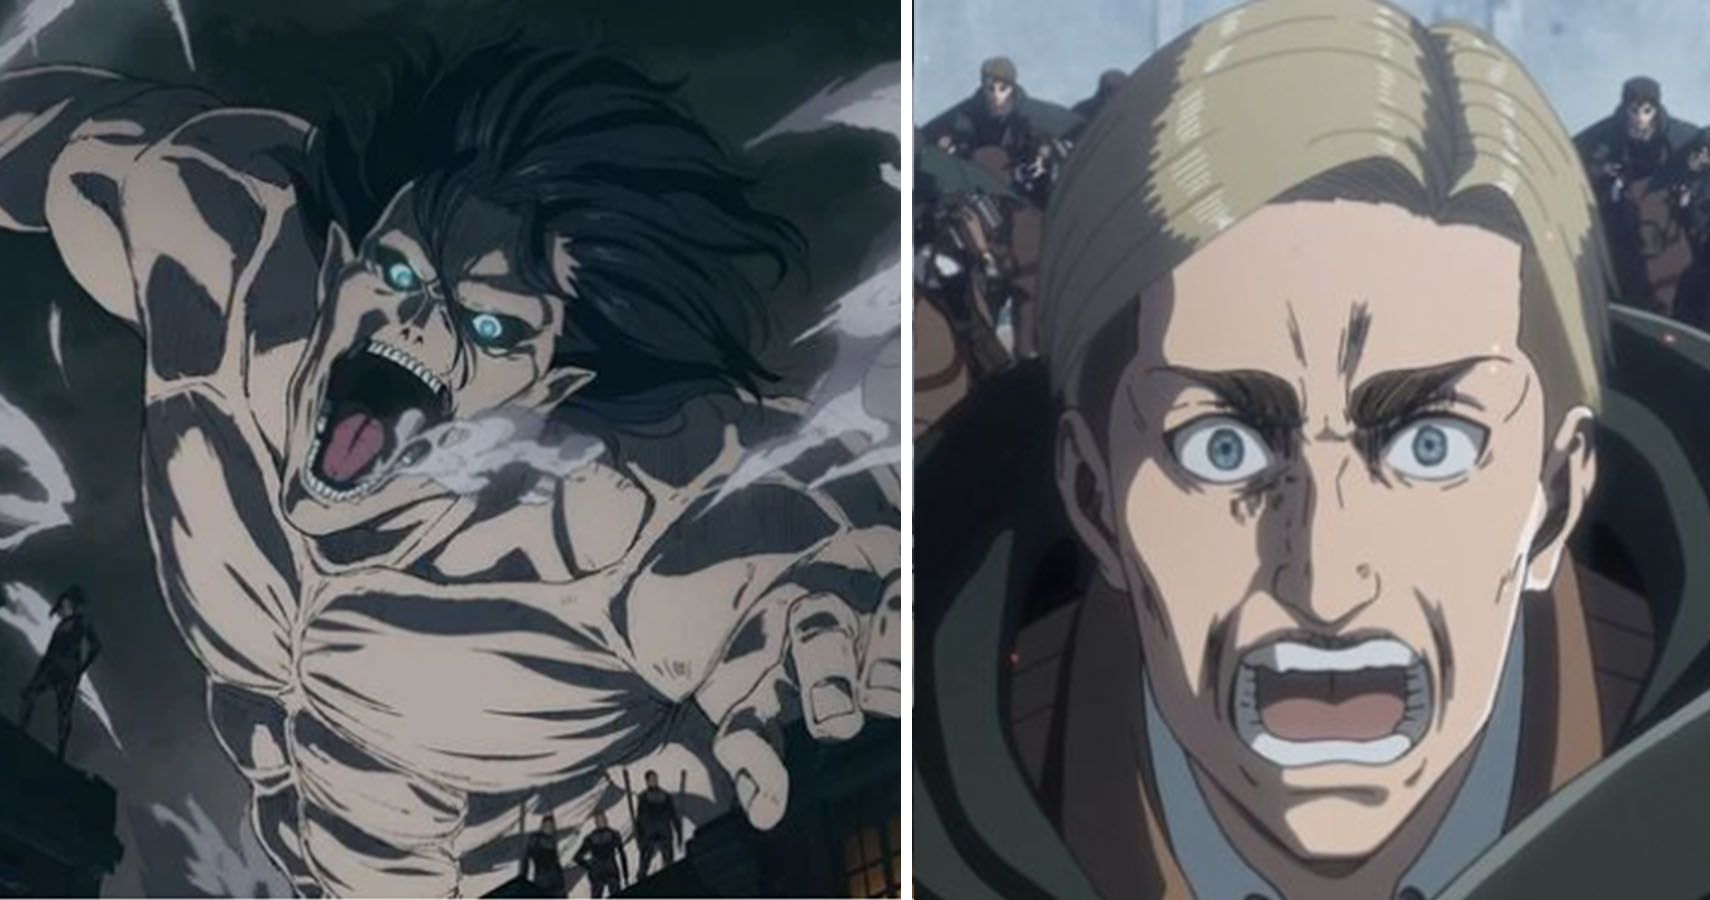 Attack On Titan: 10 Things To Expect In Season 4 Based On The Manga